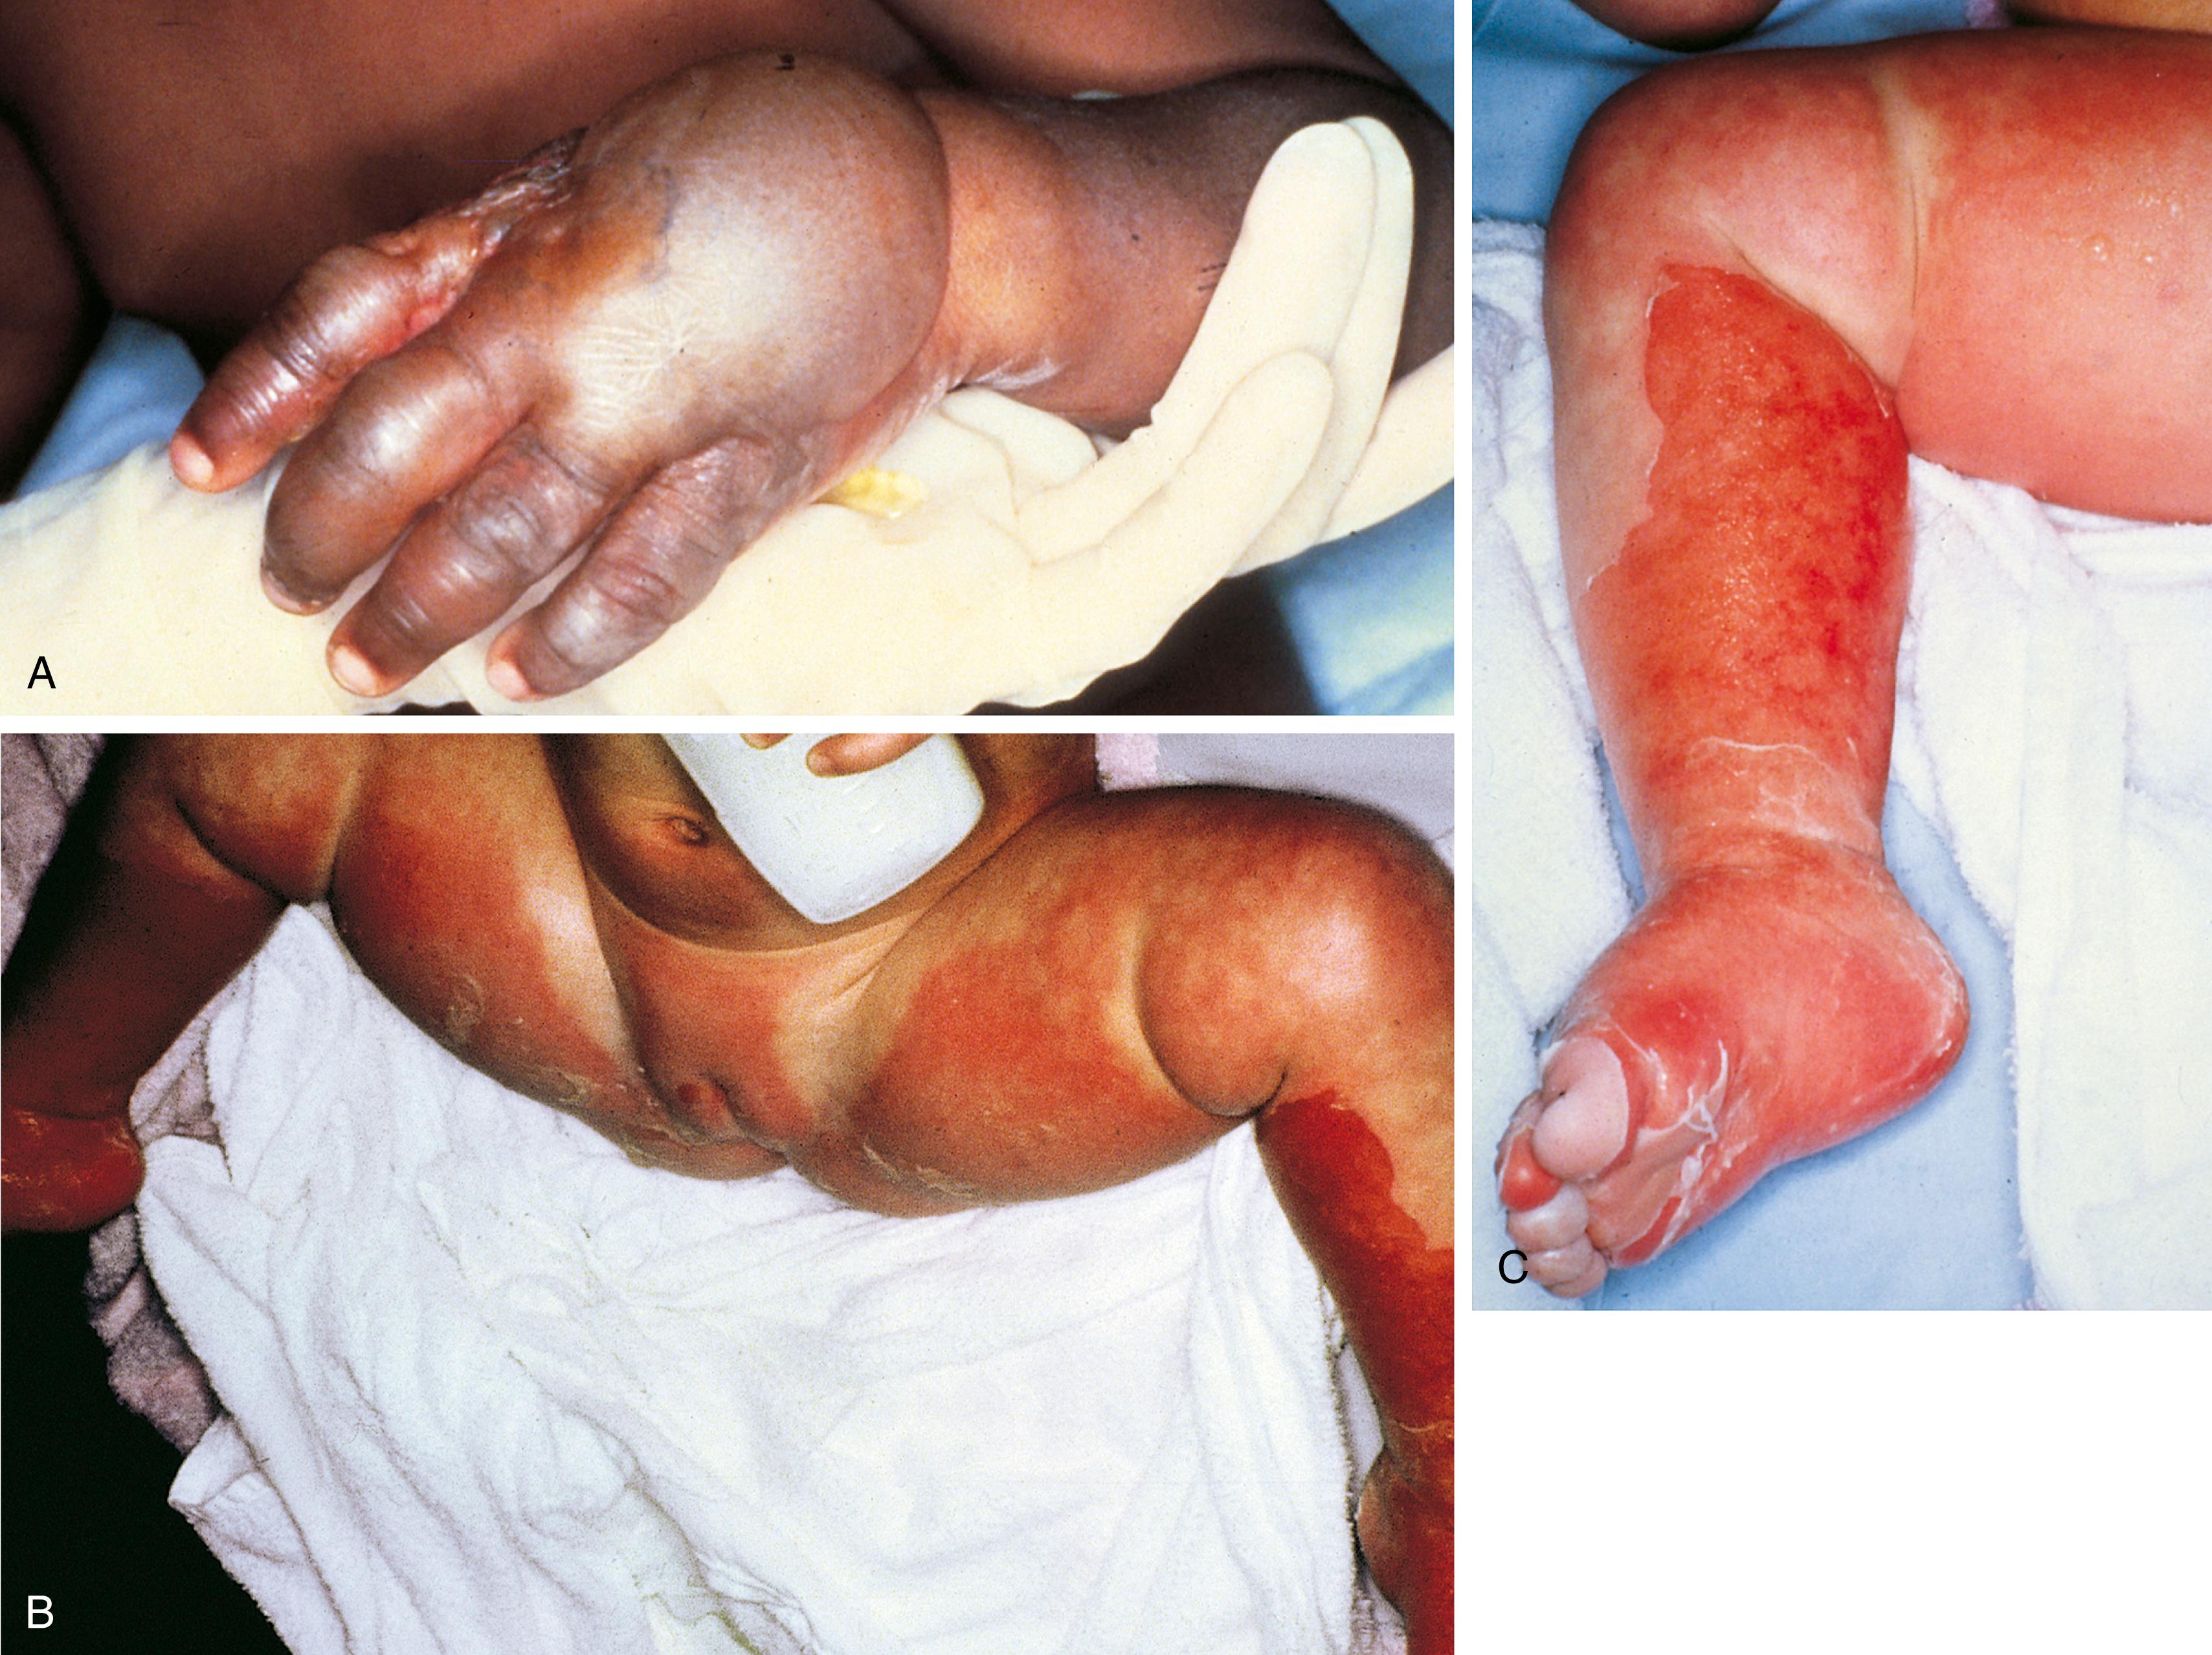 Fig. 6.15, Inflicted scalds. (A) After getting his hands into something he was not allowed to touch and making a mess, this child’s hands were held down in hot water, resulting in severe second-degree dip burns. Note the sharp line of demarcation just above the wrist joint and the uniform depth of the burn. (B) This toddler was dipped in a tub of scalding water while being held under the arms and knees, as a “lesson” after a toileting accident. (C) Close-up of severe second-degree burns of the foot and lower leg of the same child.